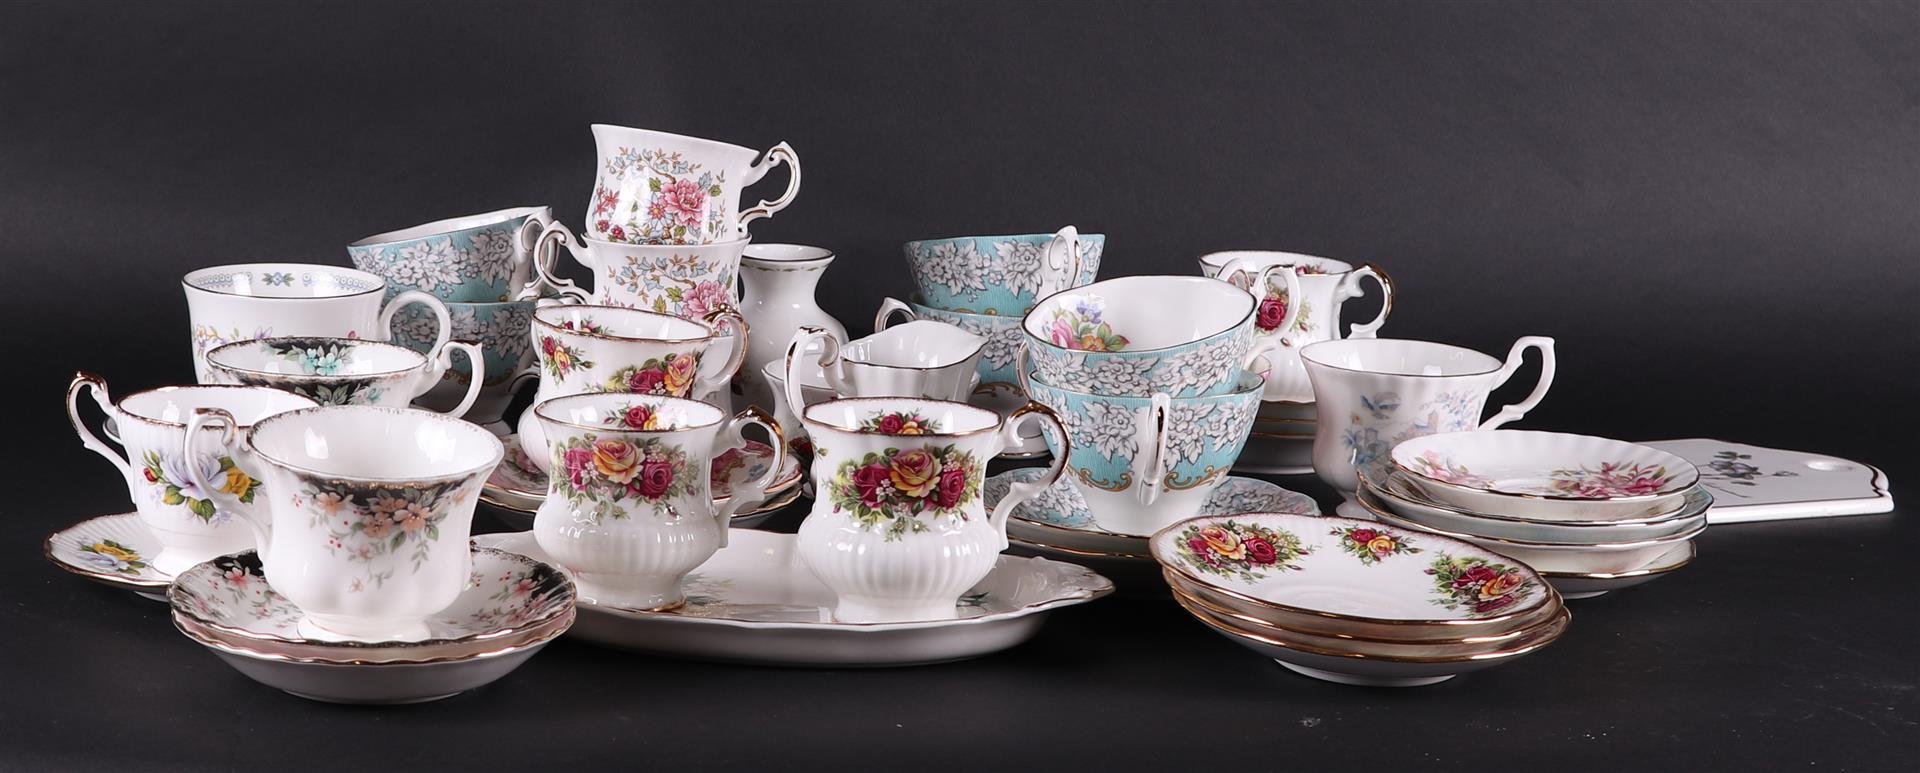 An extensive  lot  with various "Royal Albert" cups and saucers.